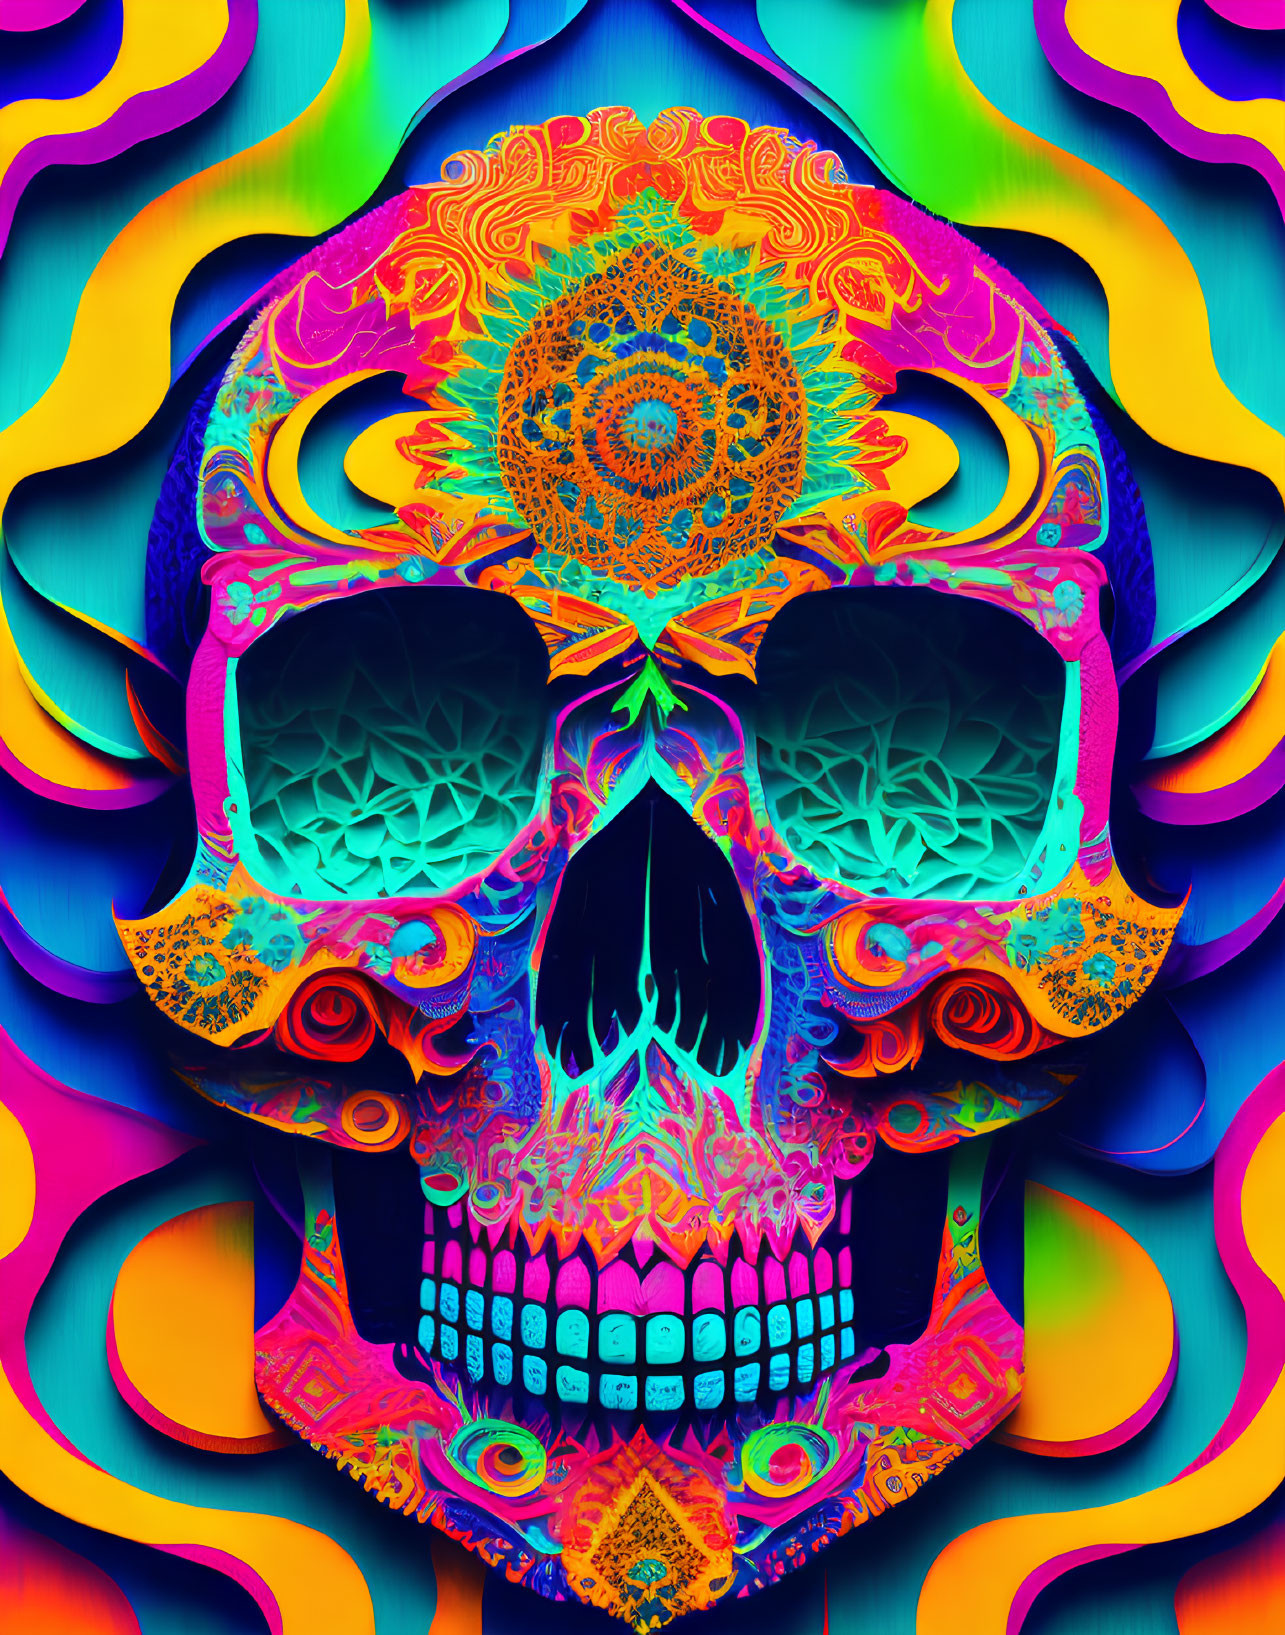 Colorful Psychedelic Skull Artwork with Neon Patterns